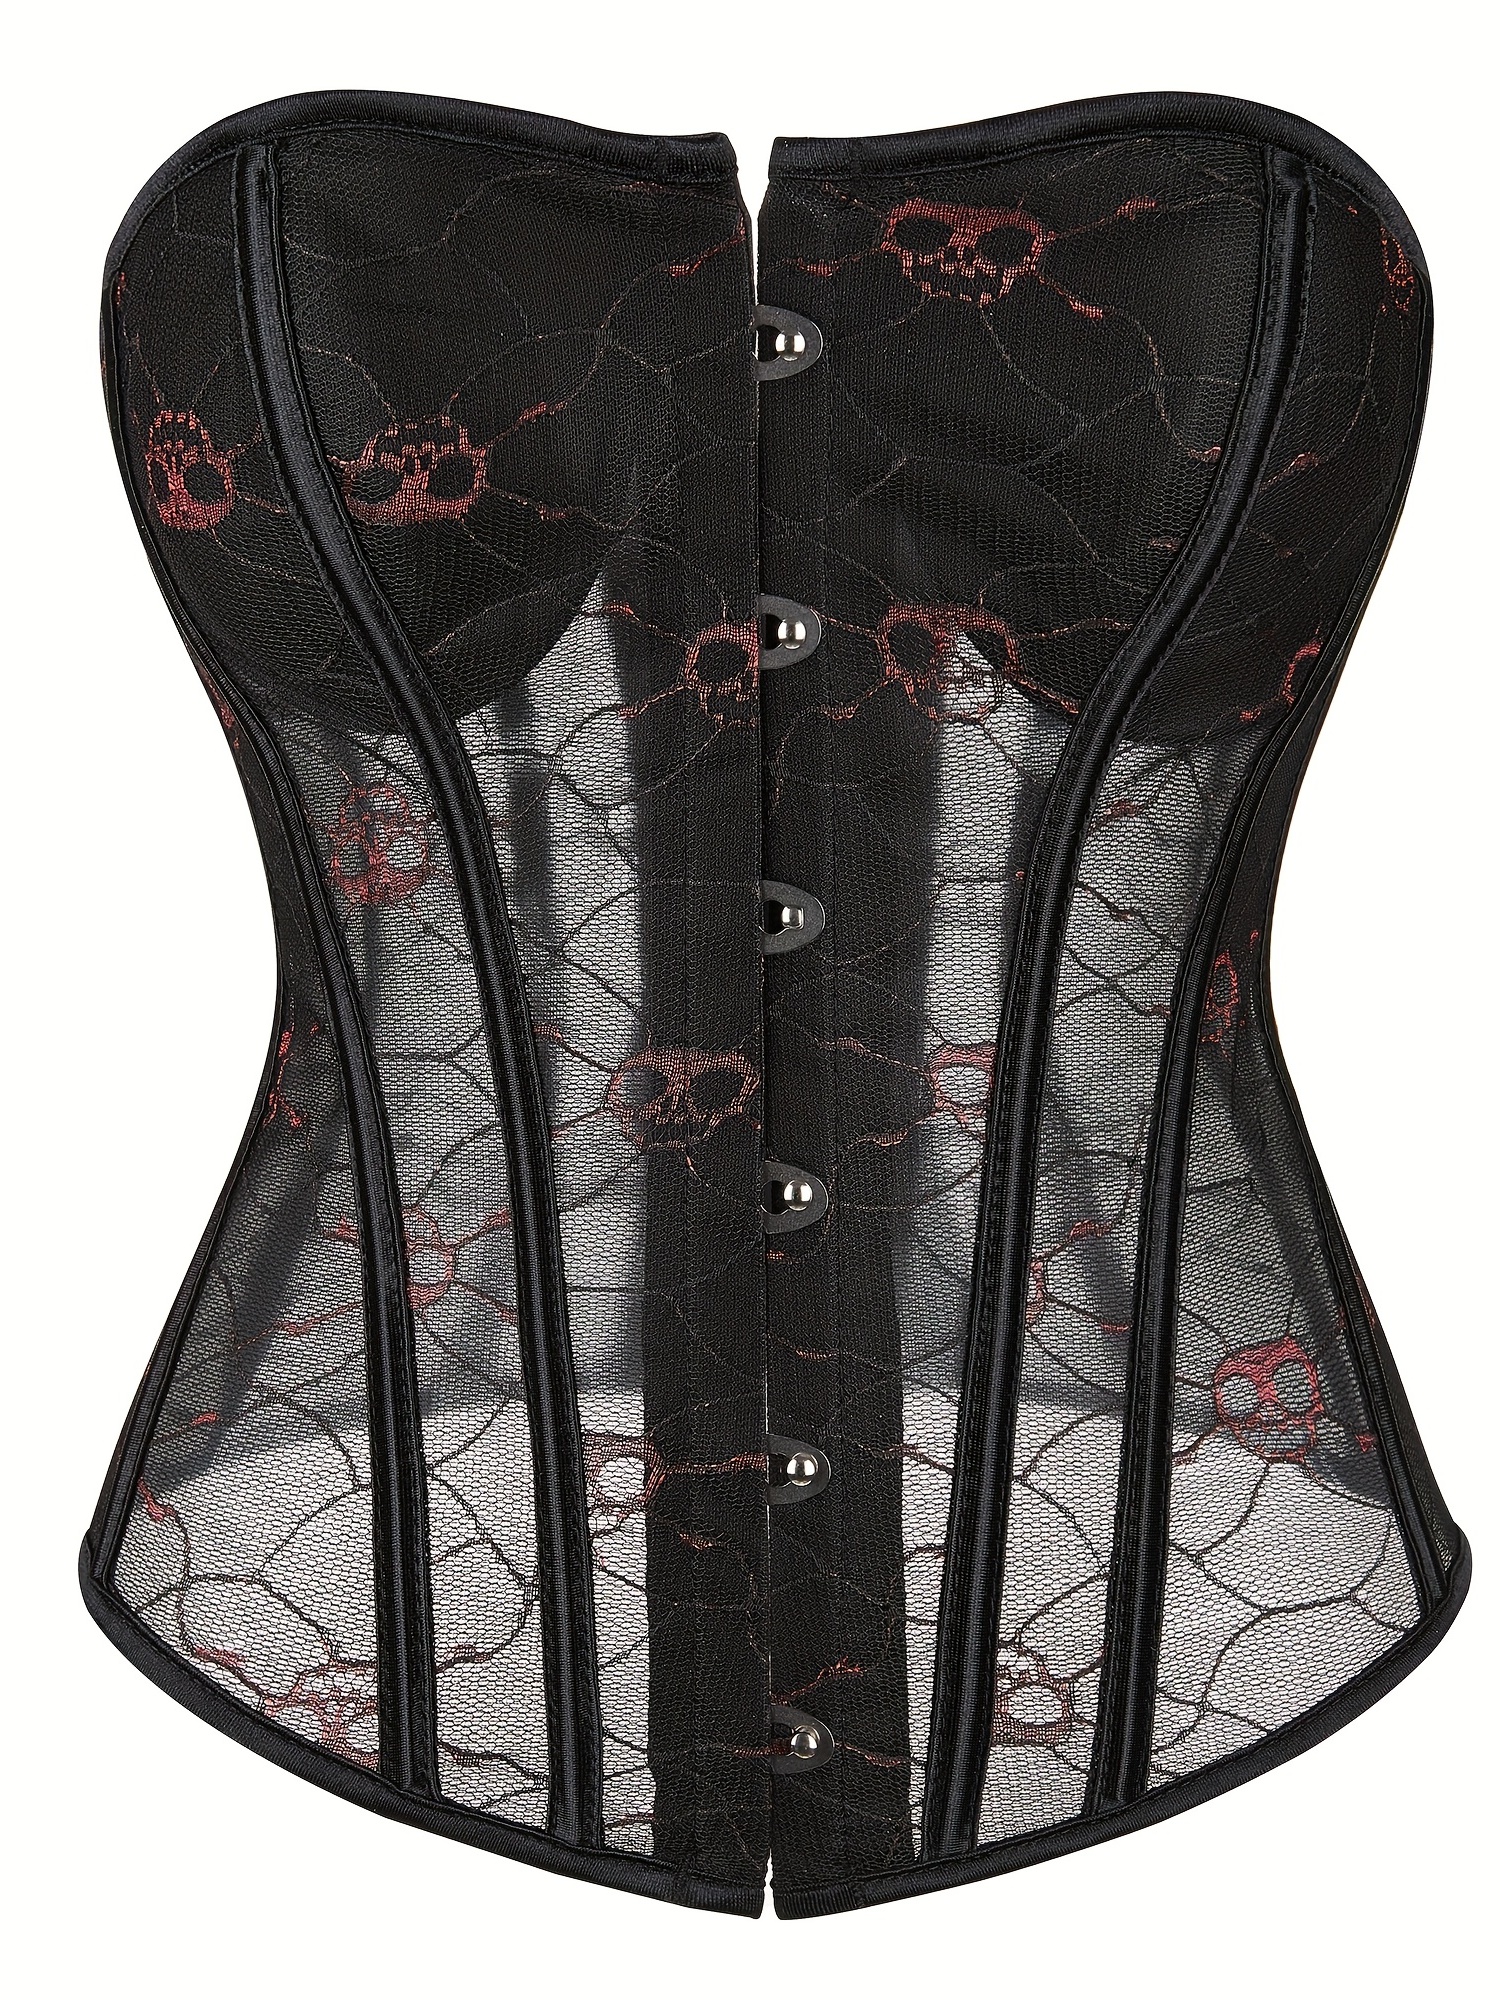 How to Sew a Transparent Corset with Mesh 